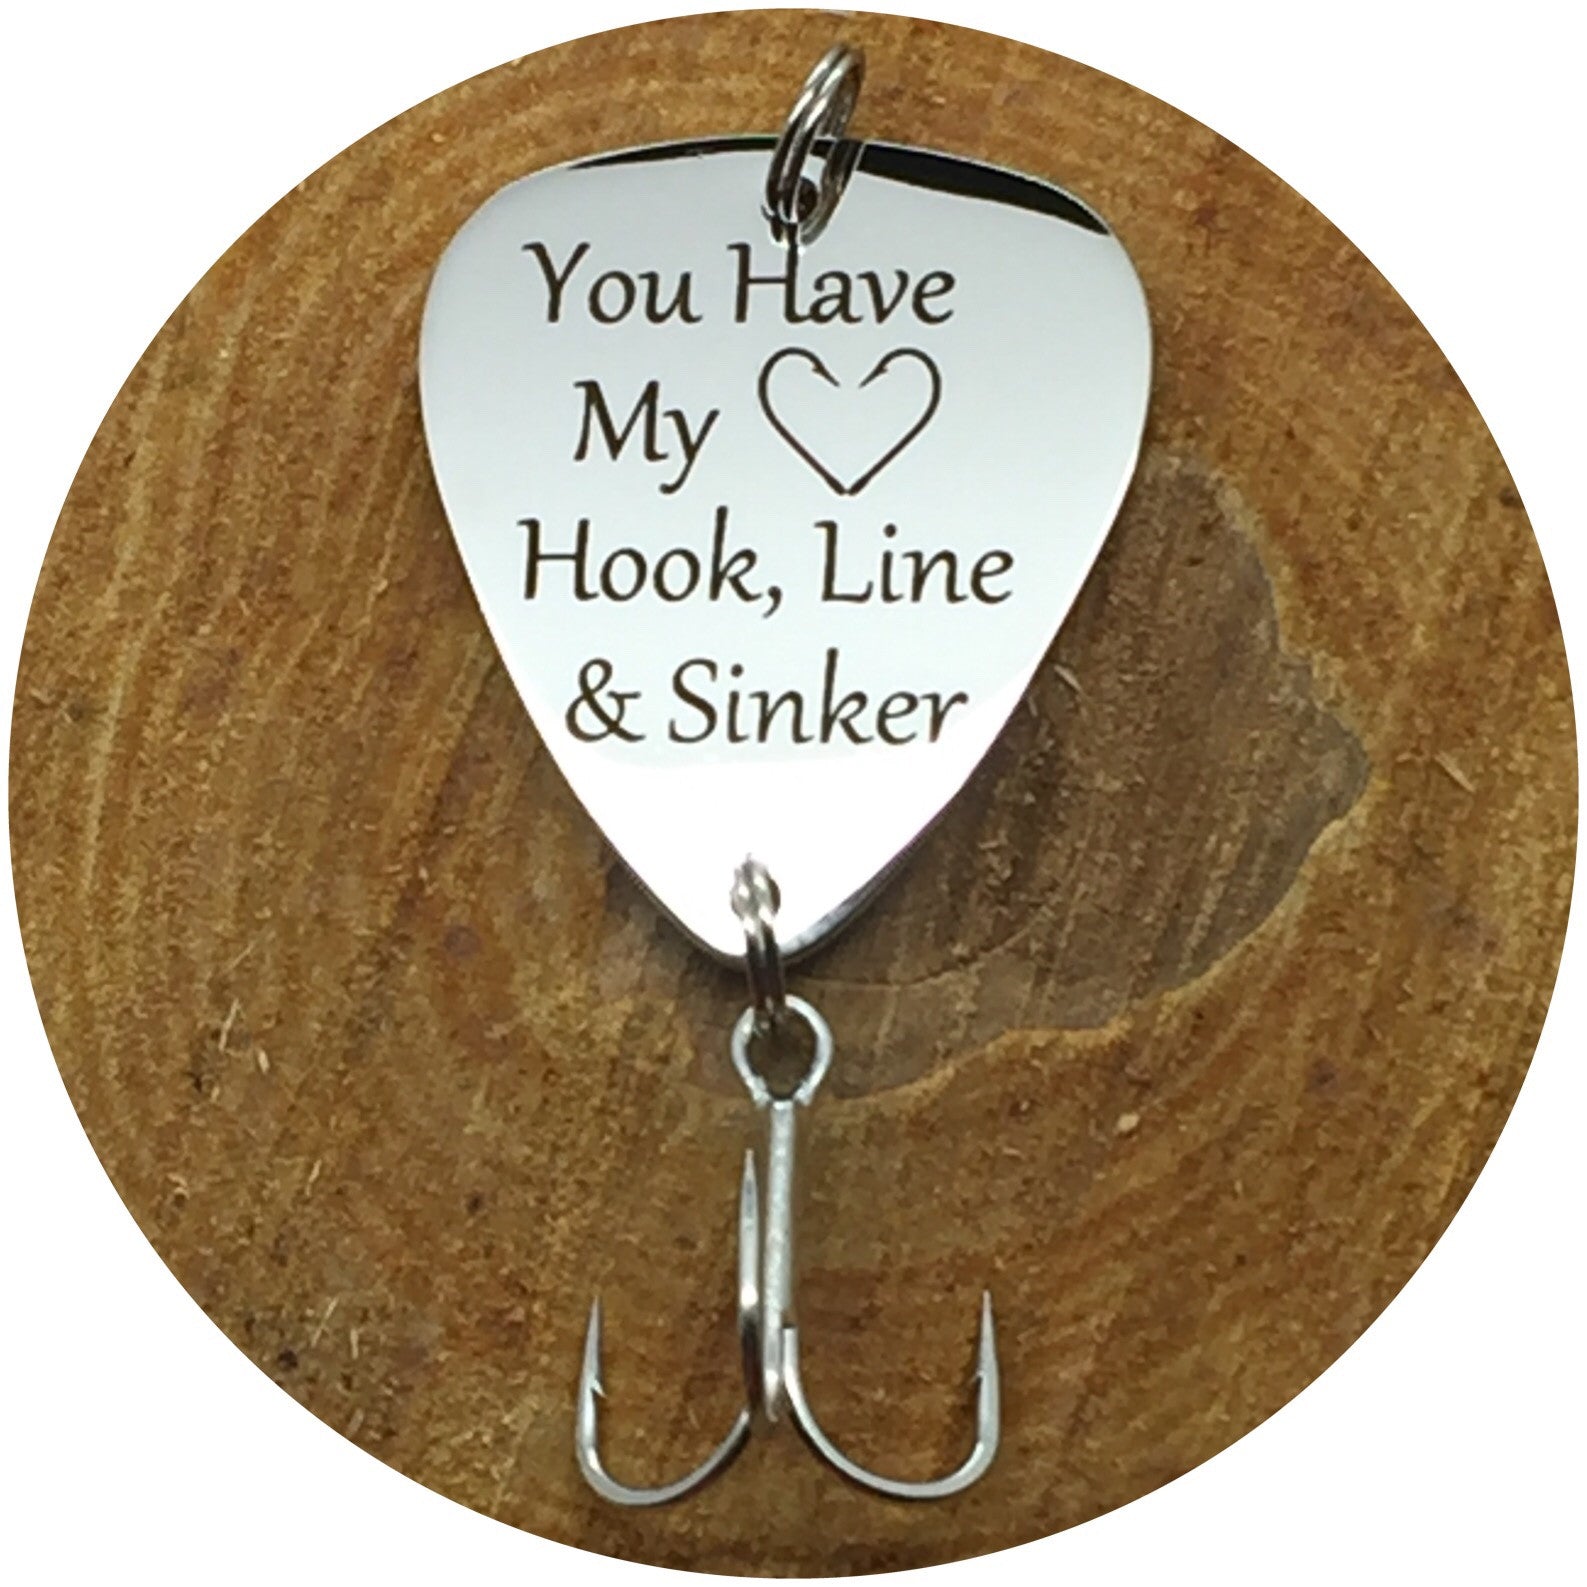 You are the greatest Catch fishing lure - Alaska Life Designs